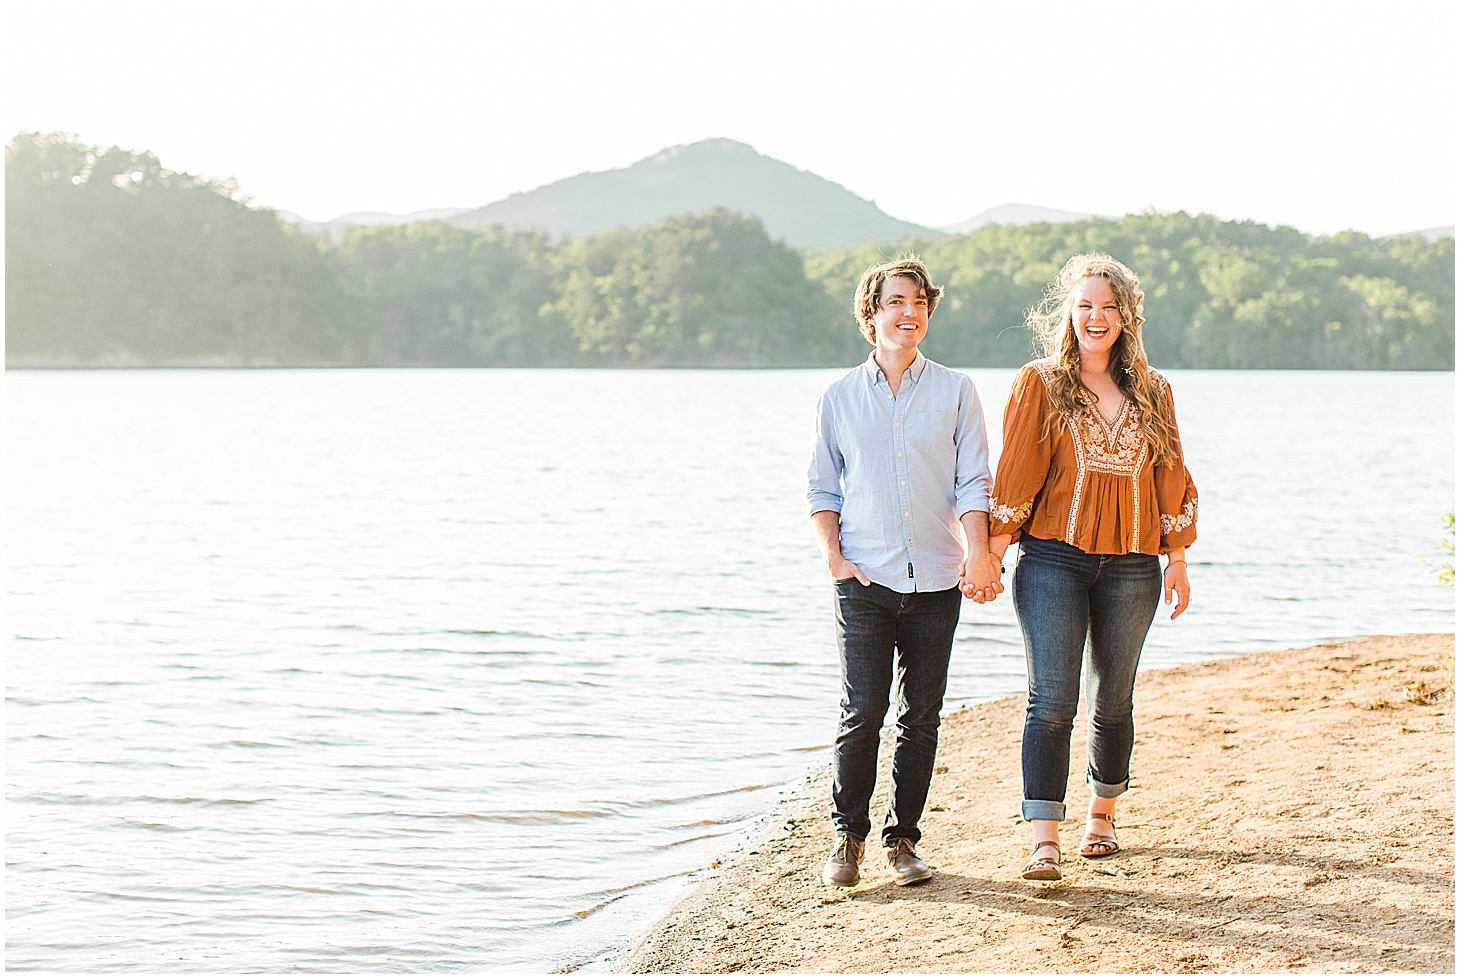 carvinscoveengagementsession_roanokeengagementsession_carvinscove_virginiawedding_virginiaweddingphotographer_vaweddingphotographer_photo_0027.jpg